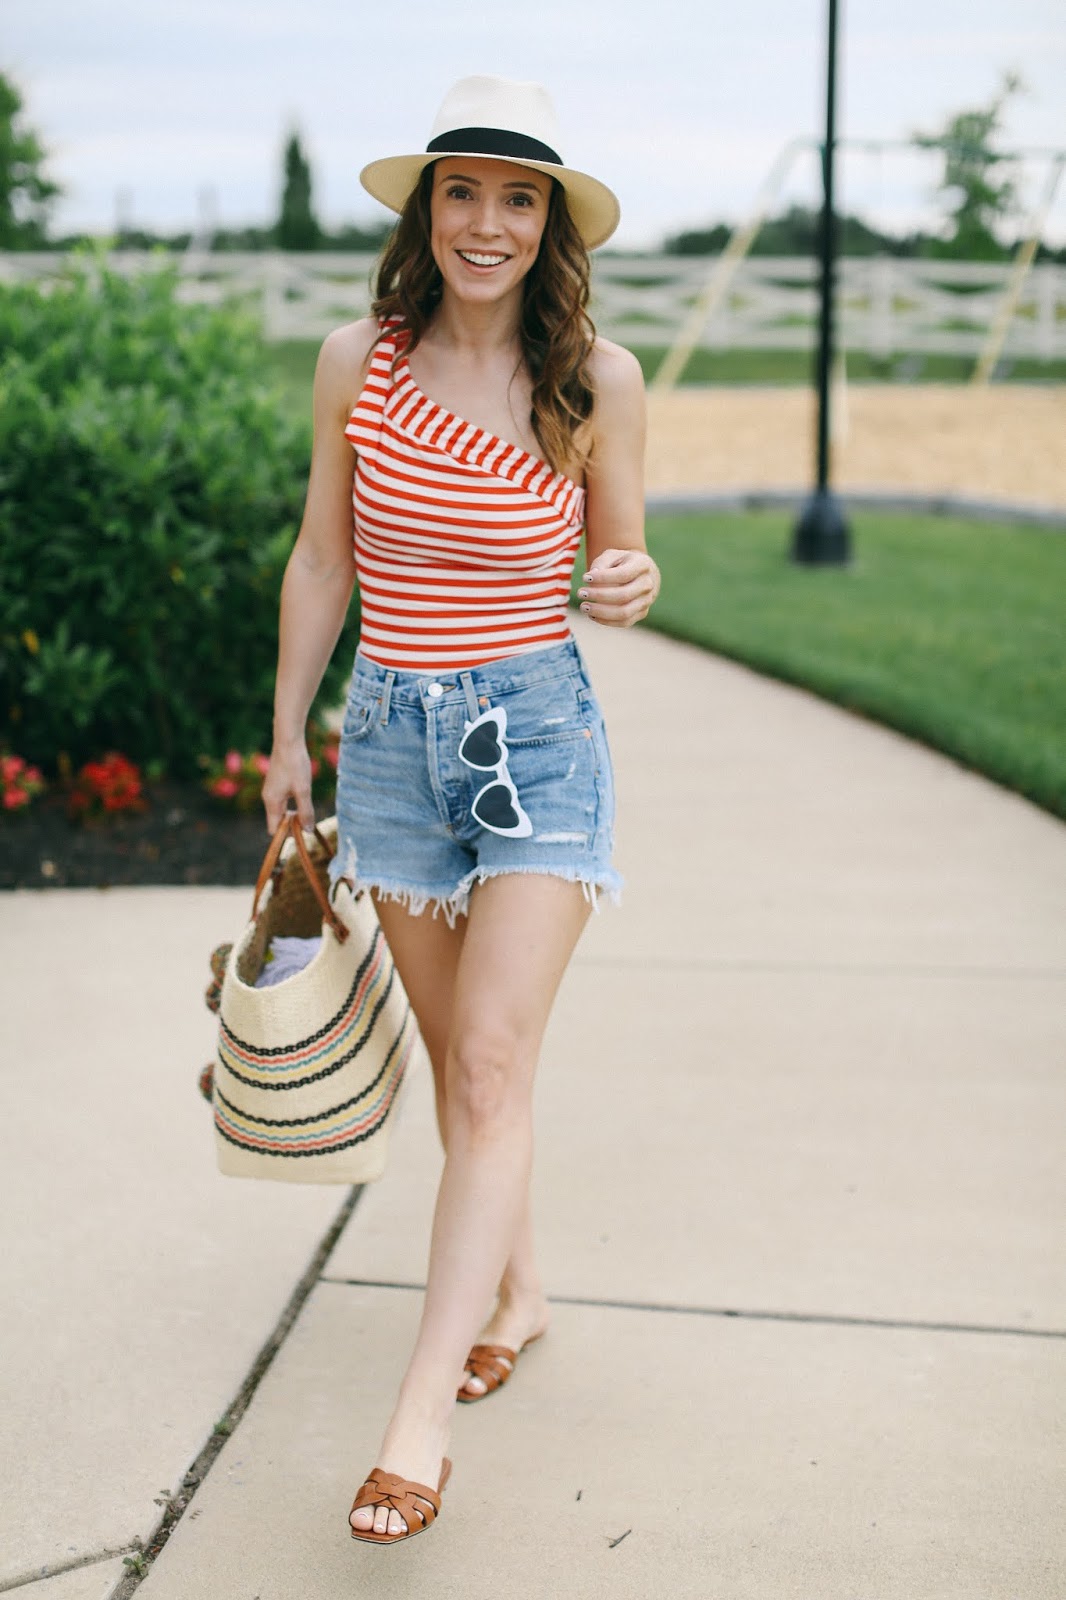 Pool Day + 4th of July Outfit Ideas - alittlebitetc